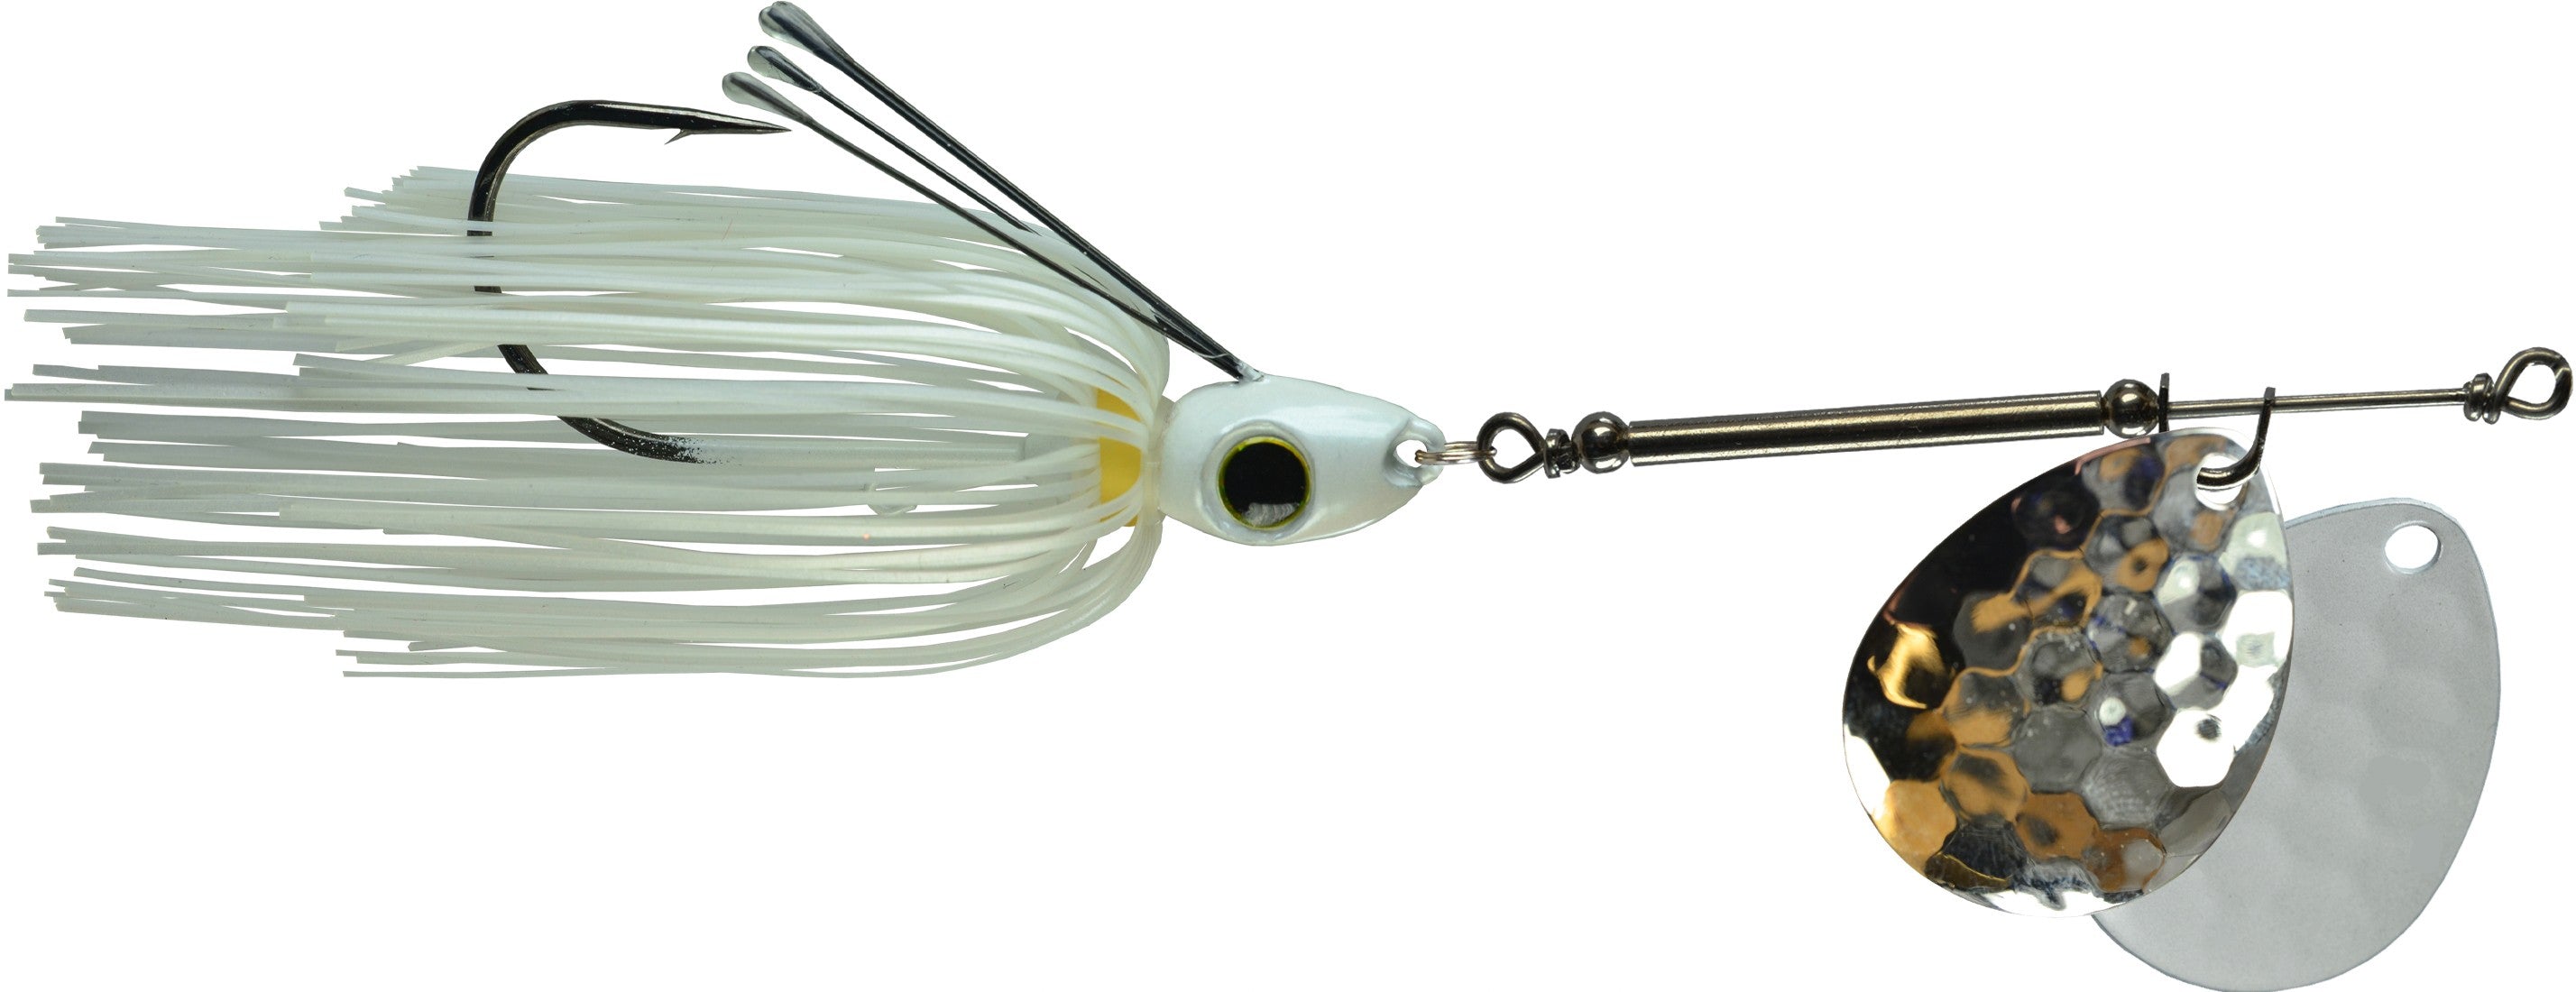 PICASSO LURES 3/4OZ KNOCKER HEAVY COVER- BLUE GLIMMER SHAD - NICKEL BLADE